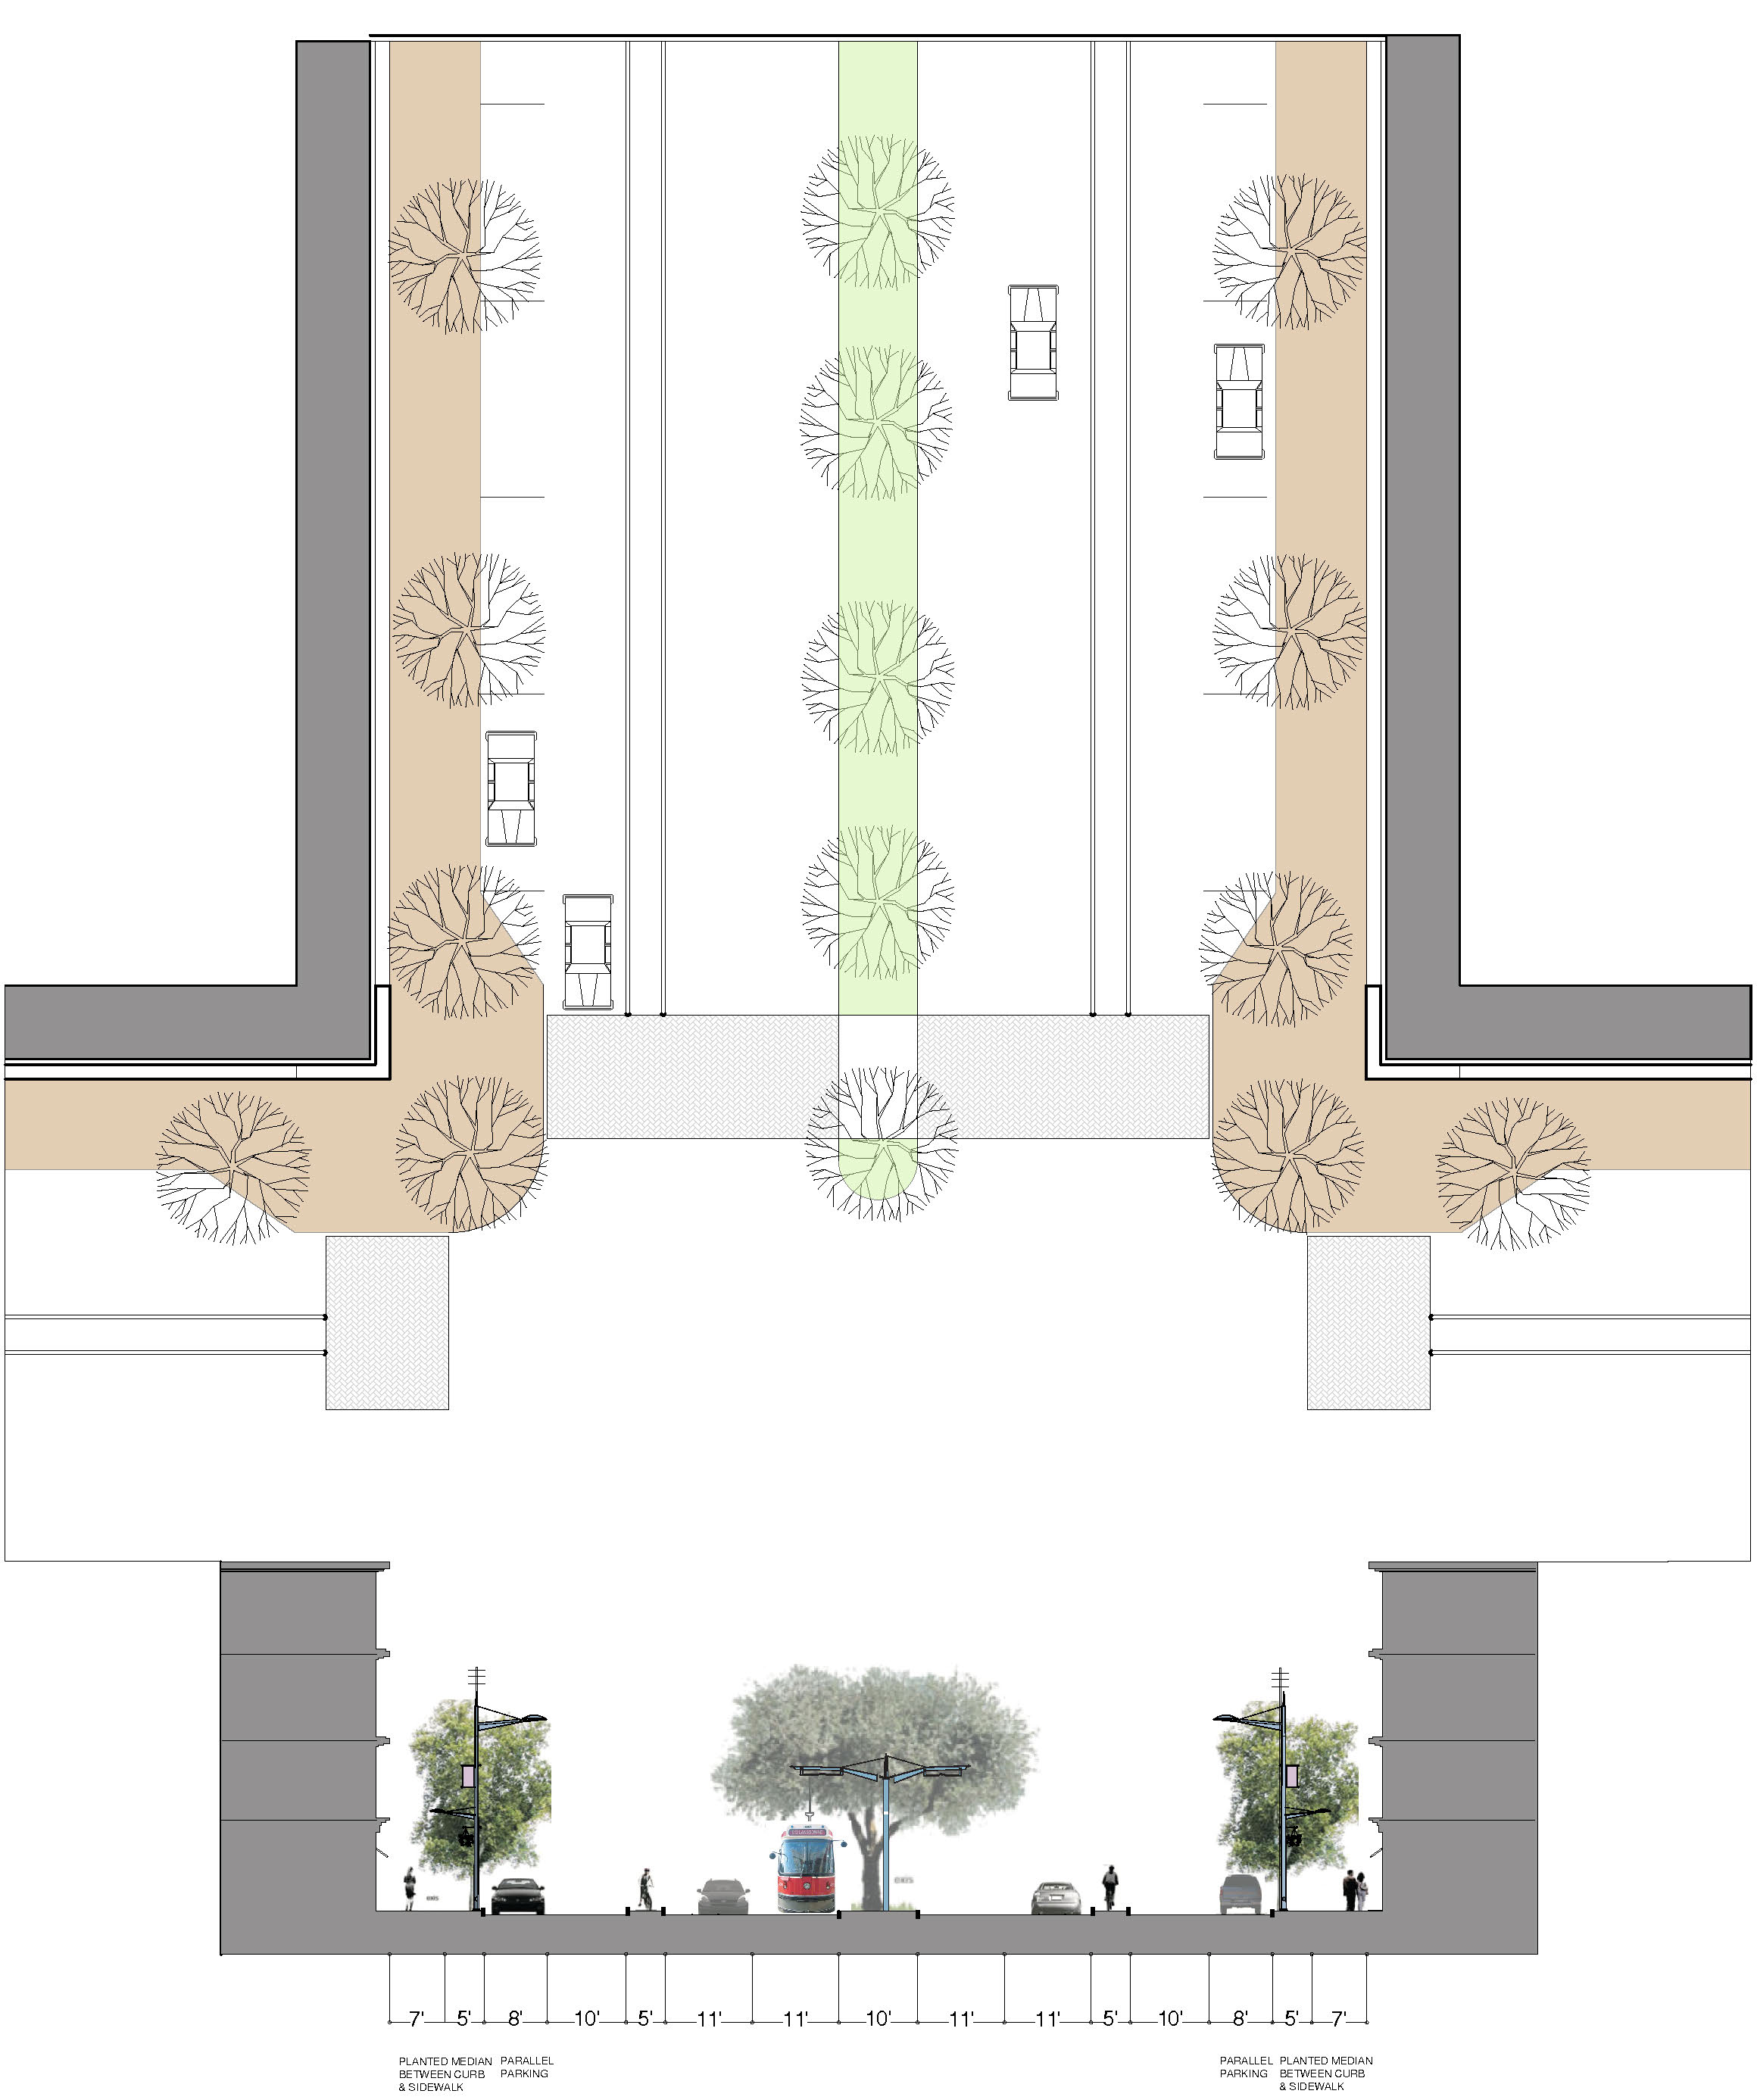 Proposed Street Section